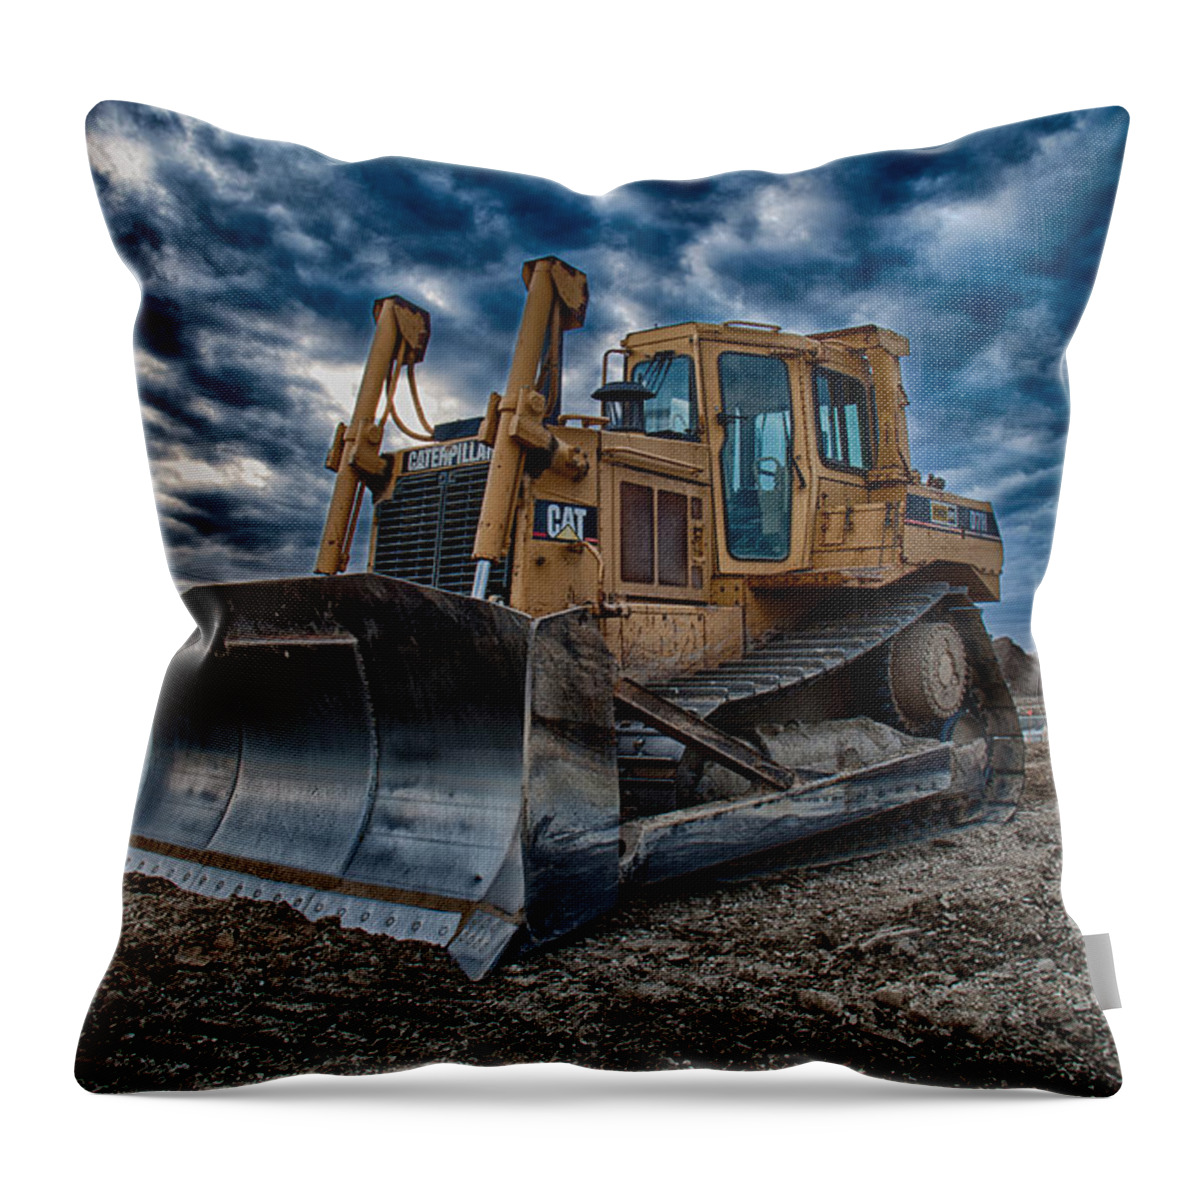 Bulldozer Throw Pillow featuring the photograph Cat Bulldozer by Mike Burgquist